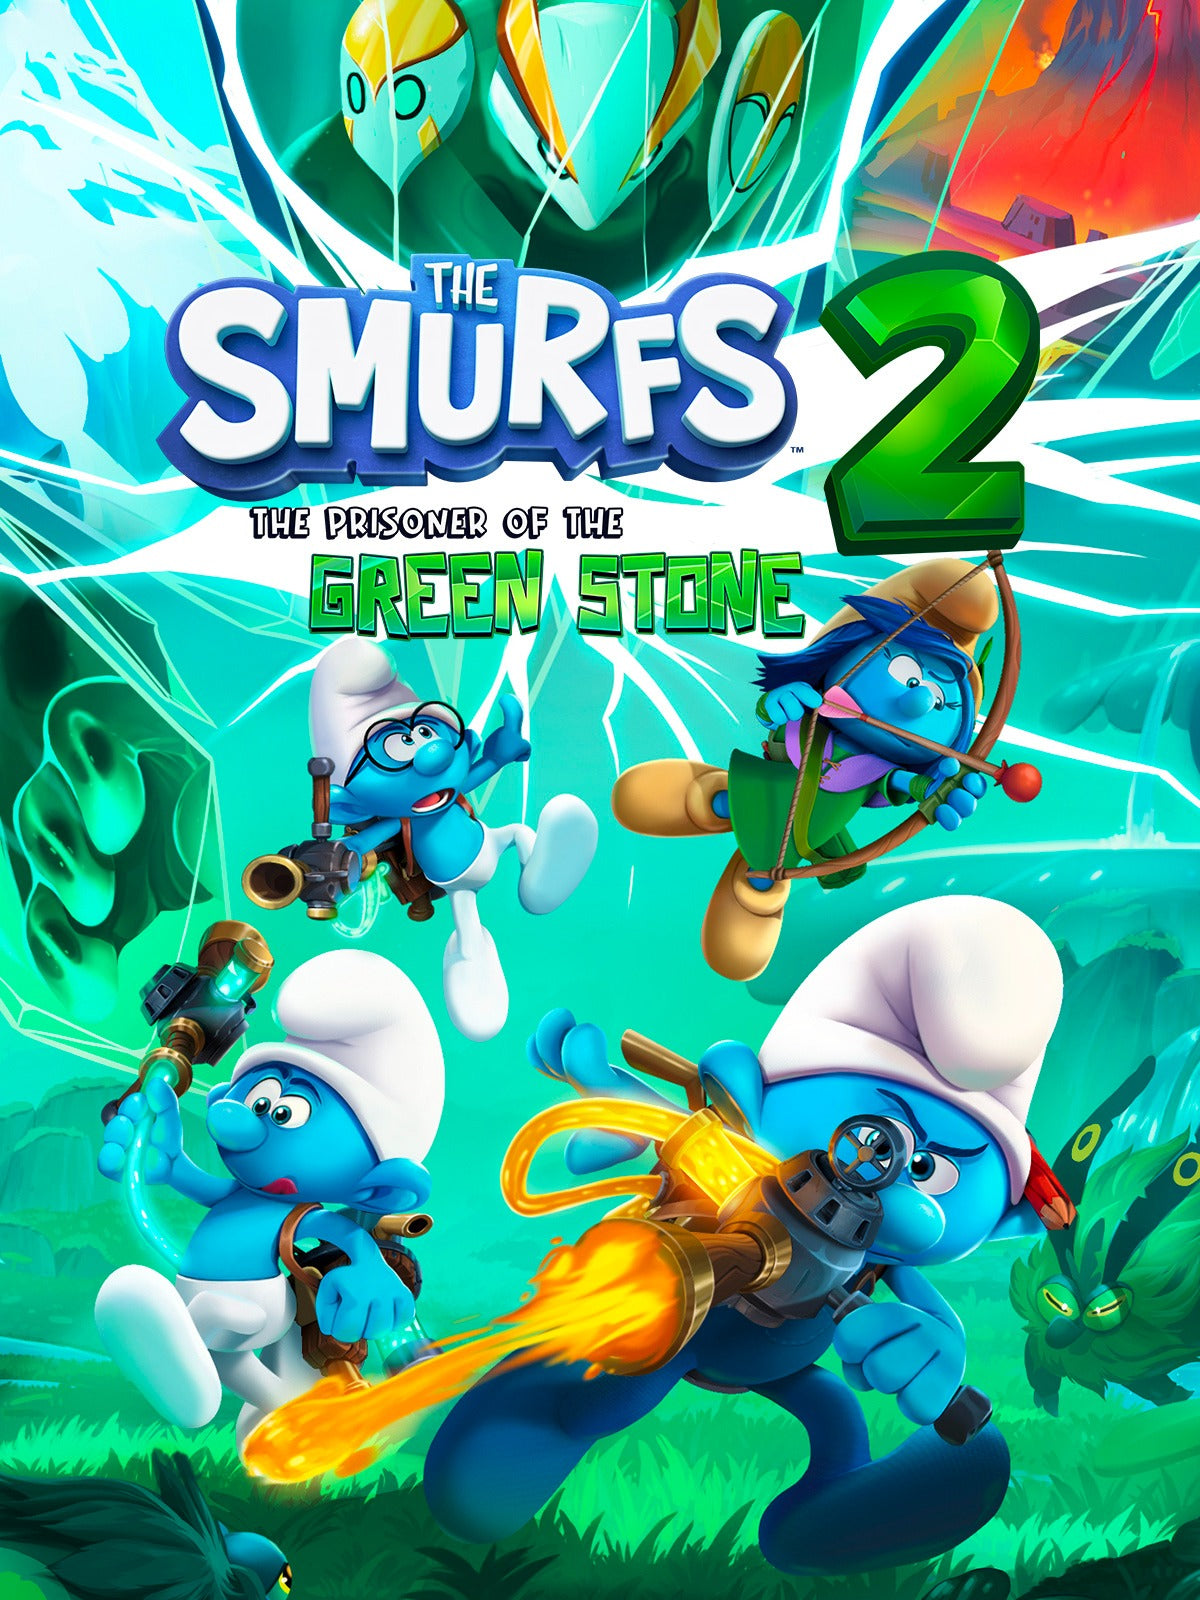 The Smurfs 2 - The Prisoner of the Green Stone (Standard Edition) - למחשב